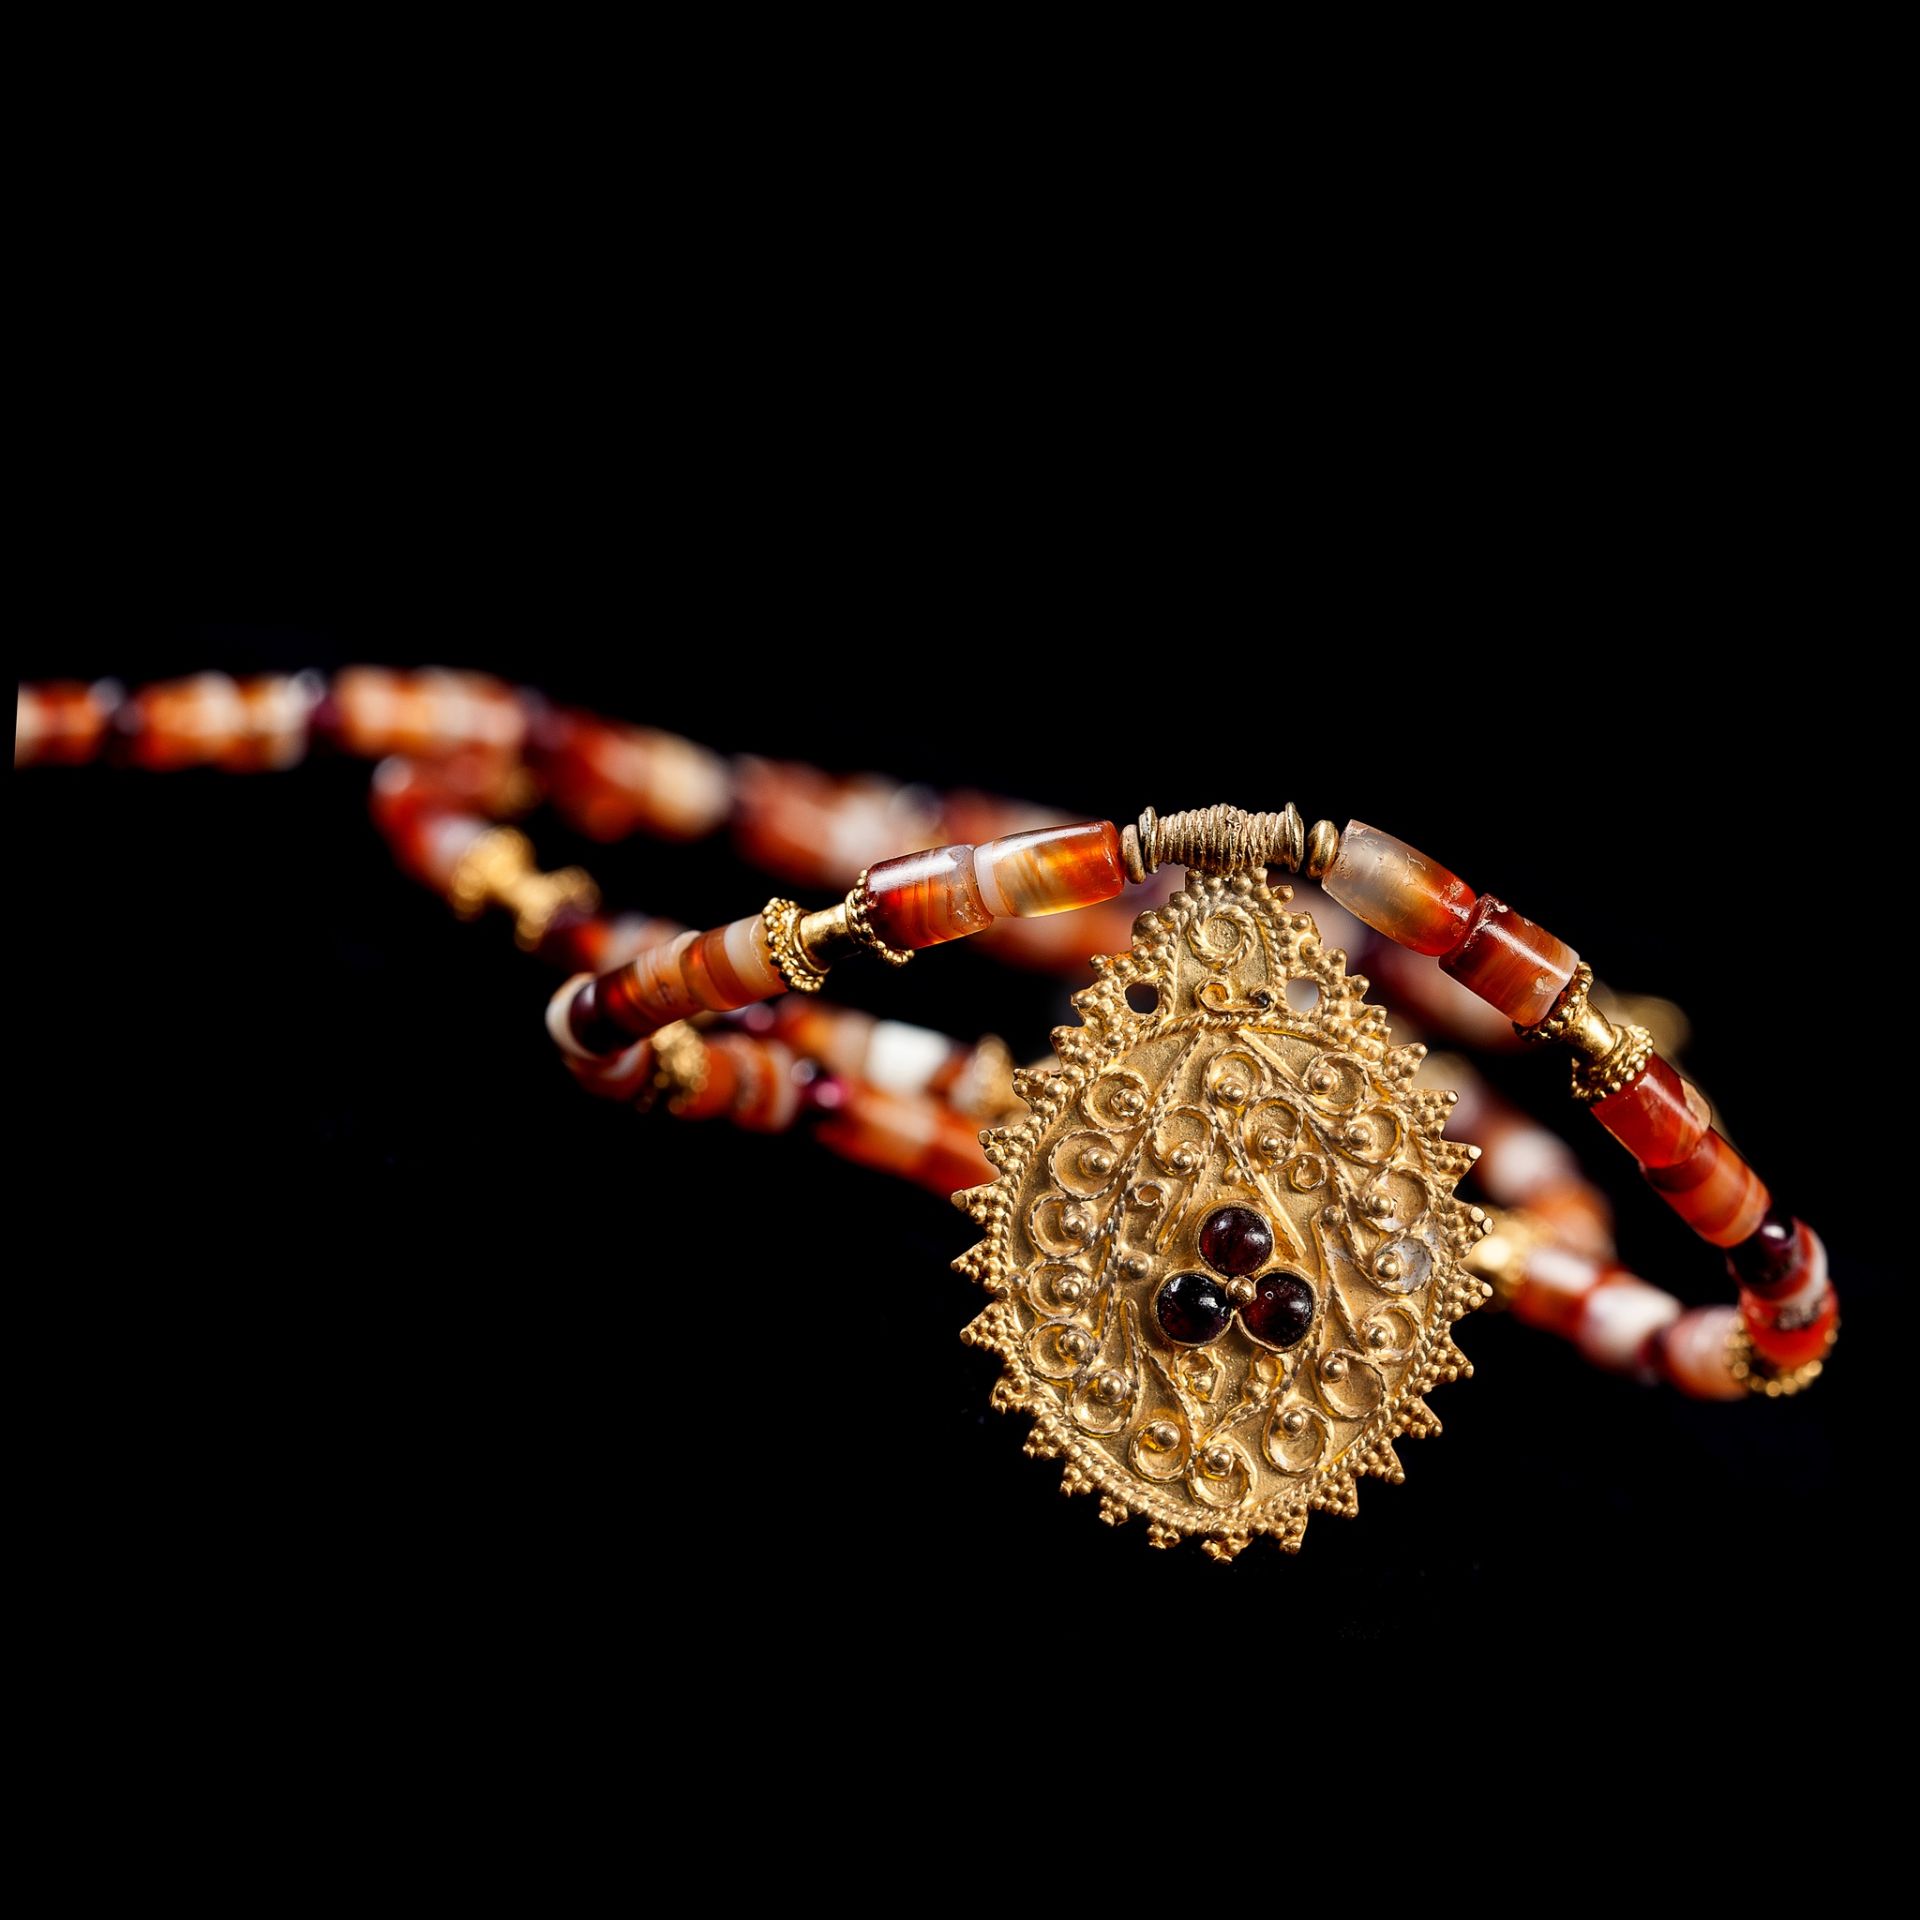 HELLENISTIC AGATE NECKLACE WITH GOLD PENDANT EASTERN MEDITERRANEAN, 3RD - 1ST CENTURY B.C. - Image 2 of 2